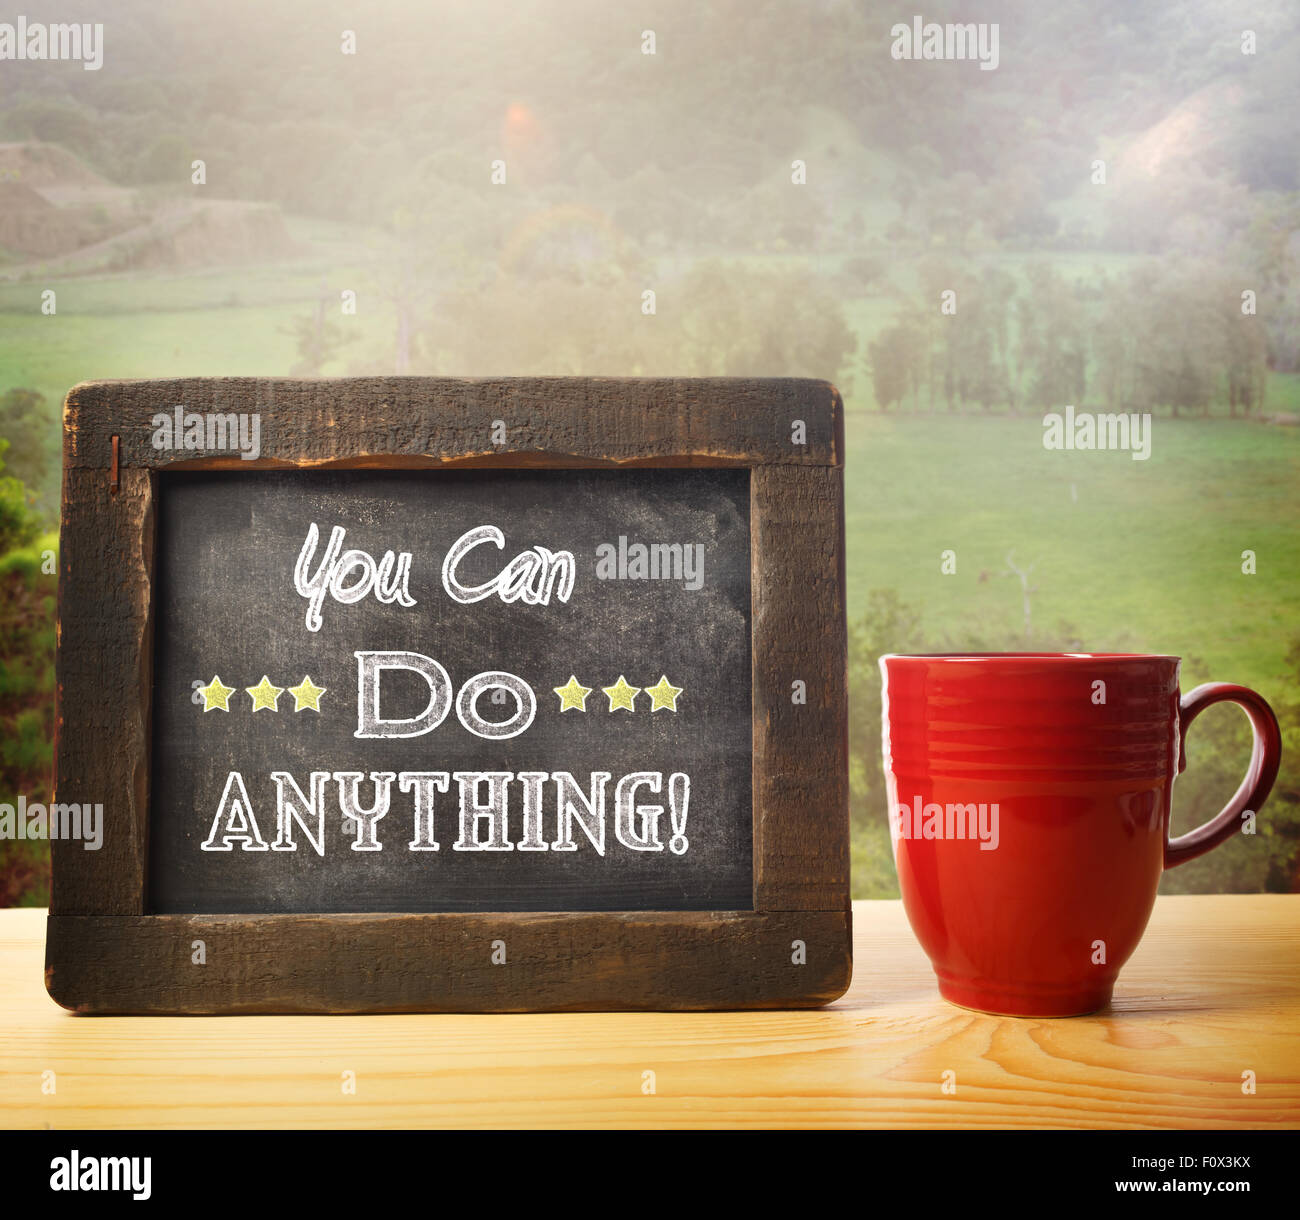 You Can Do Anything inscribed on blackboard rustic style Stock Photo